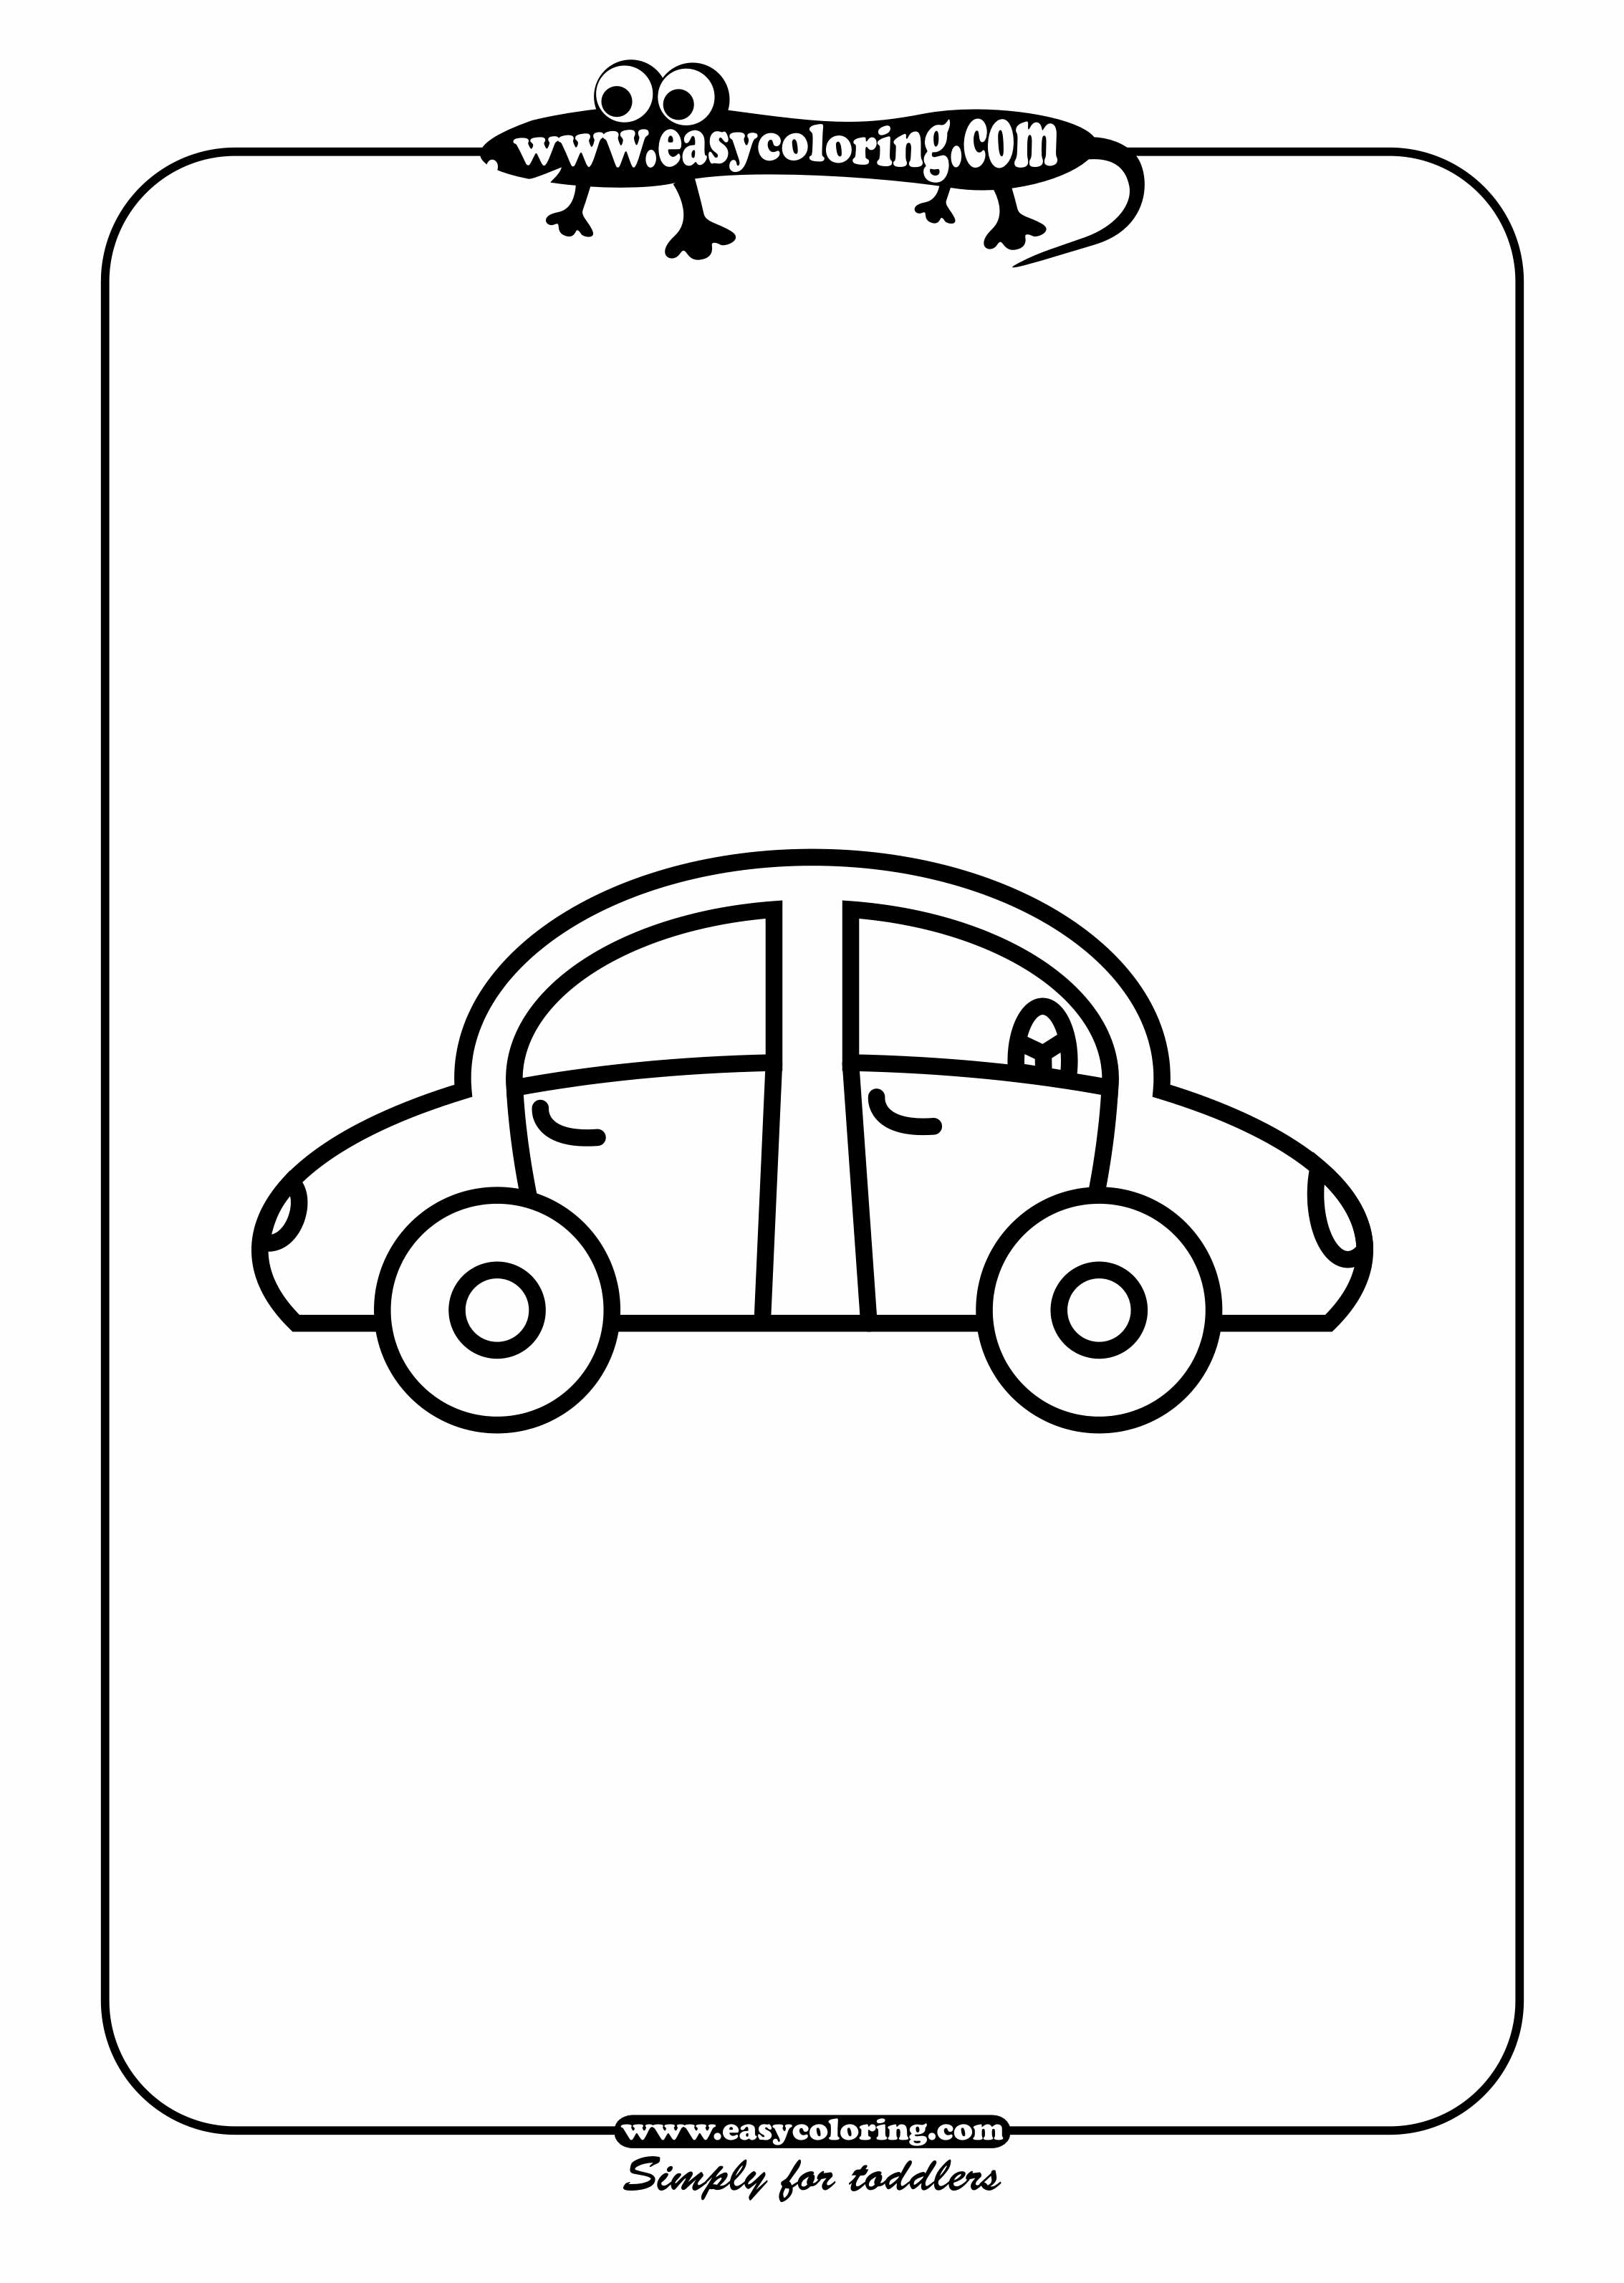 car coloring pages easy - photo #41